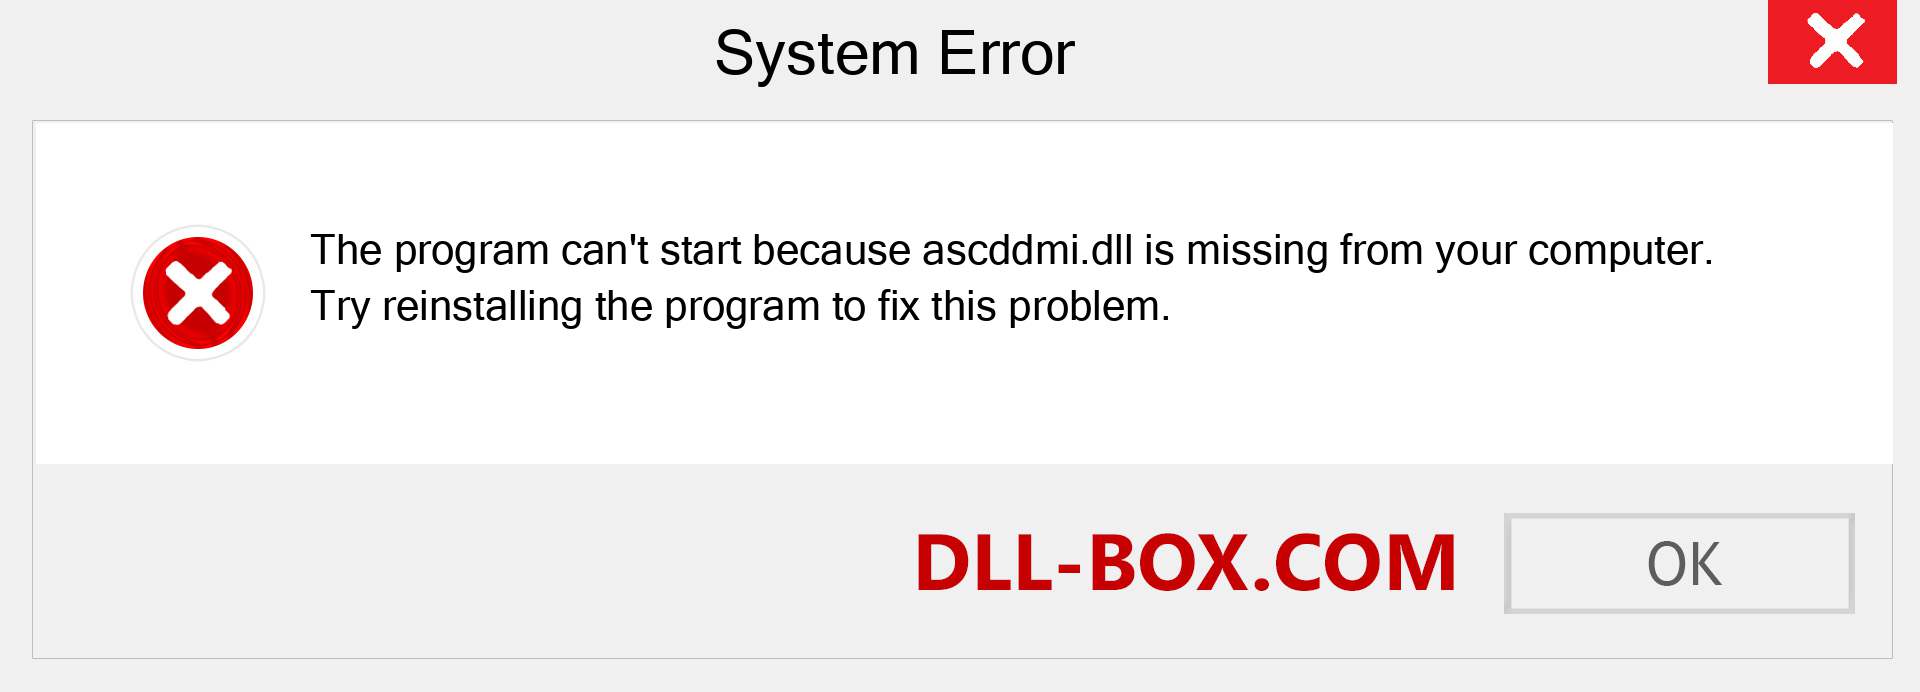  ascddmi.dll file is missing?. Download for Windows 7, 8, 10 - Fix  ascddmi dll Missing Error on Windows, photos, images